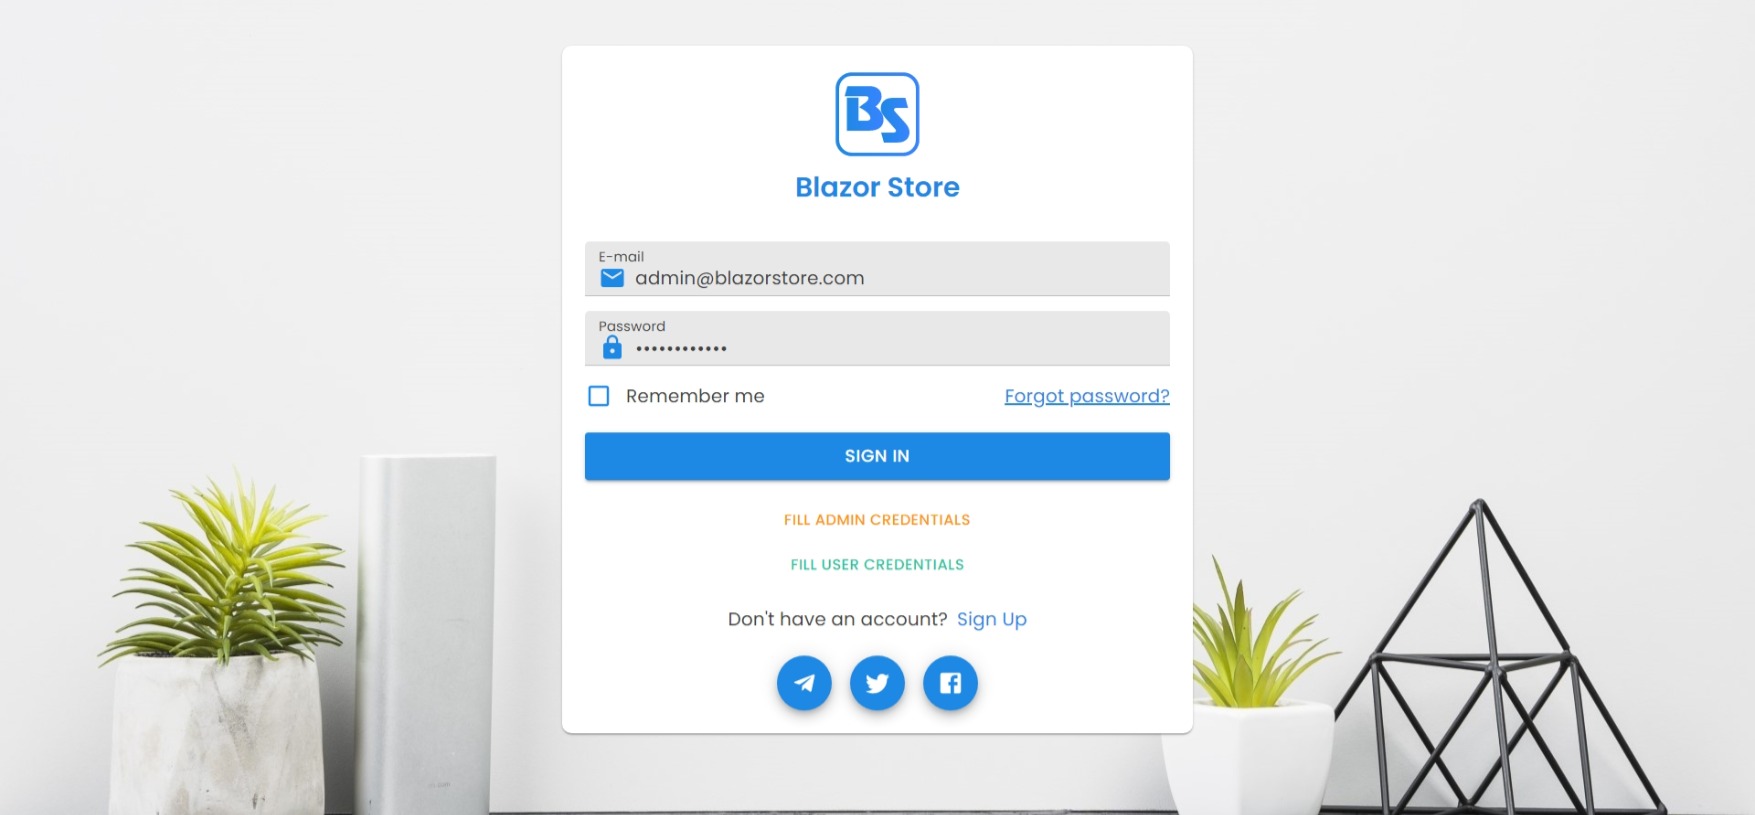 Blazor Store - Mobile PWA and Site Templates with Powerful Built-in Functions - 3